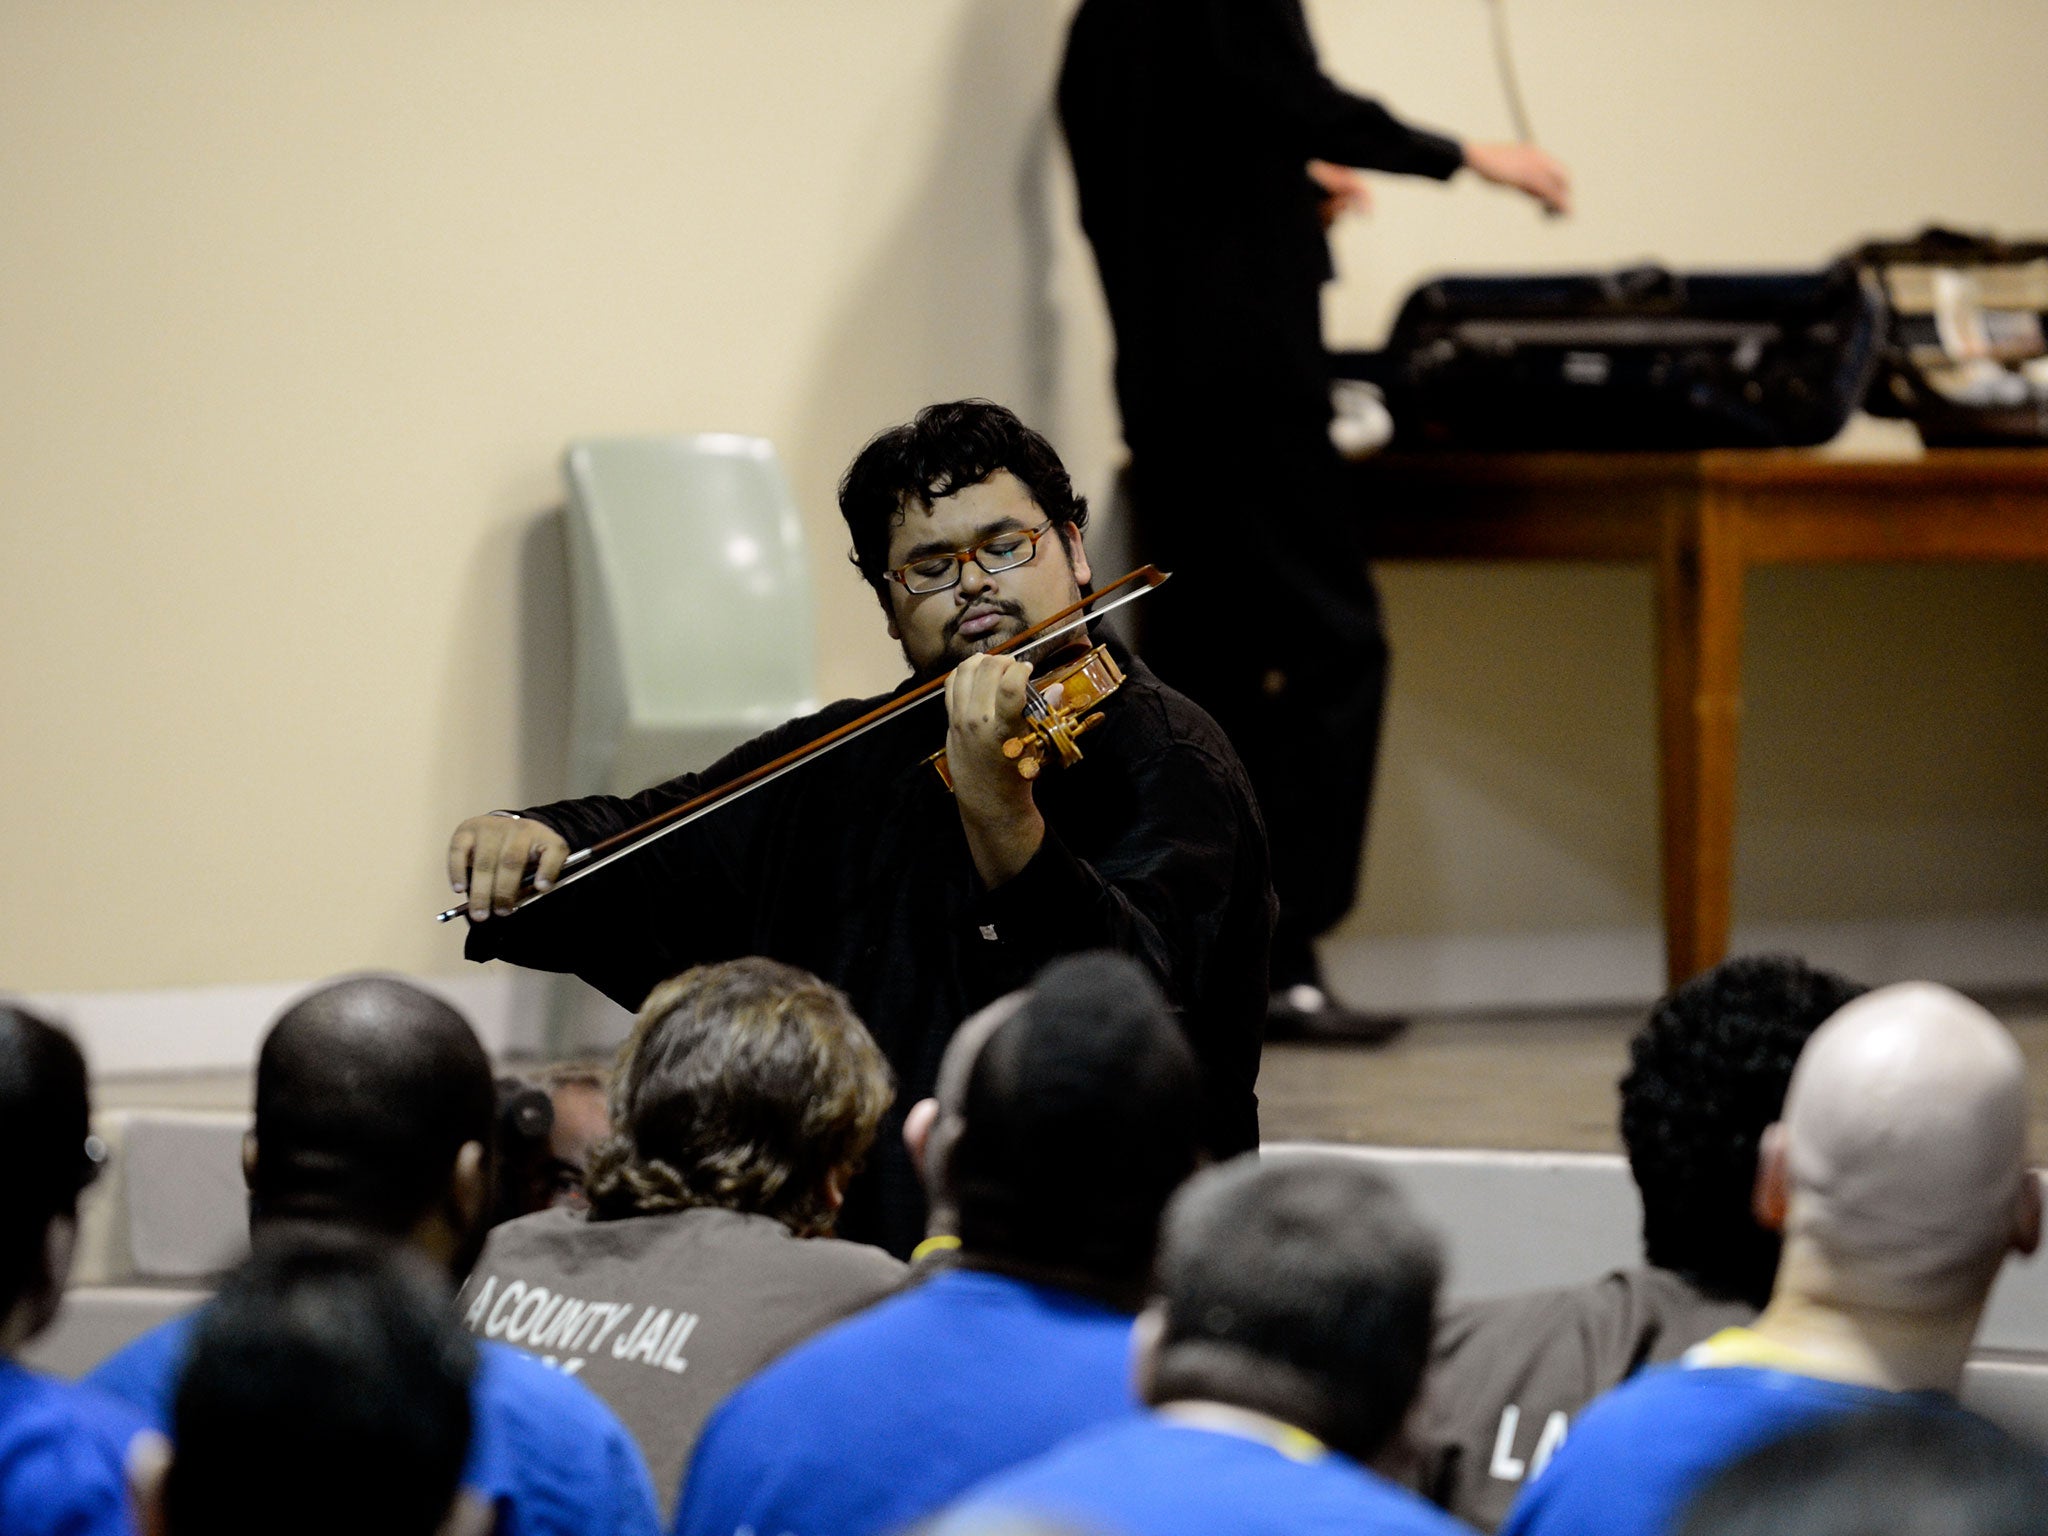 Vijay Gupta and his colleagues playing a Street Symphony concert at Twin Towers jail in Los Angeles